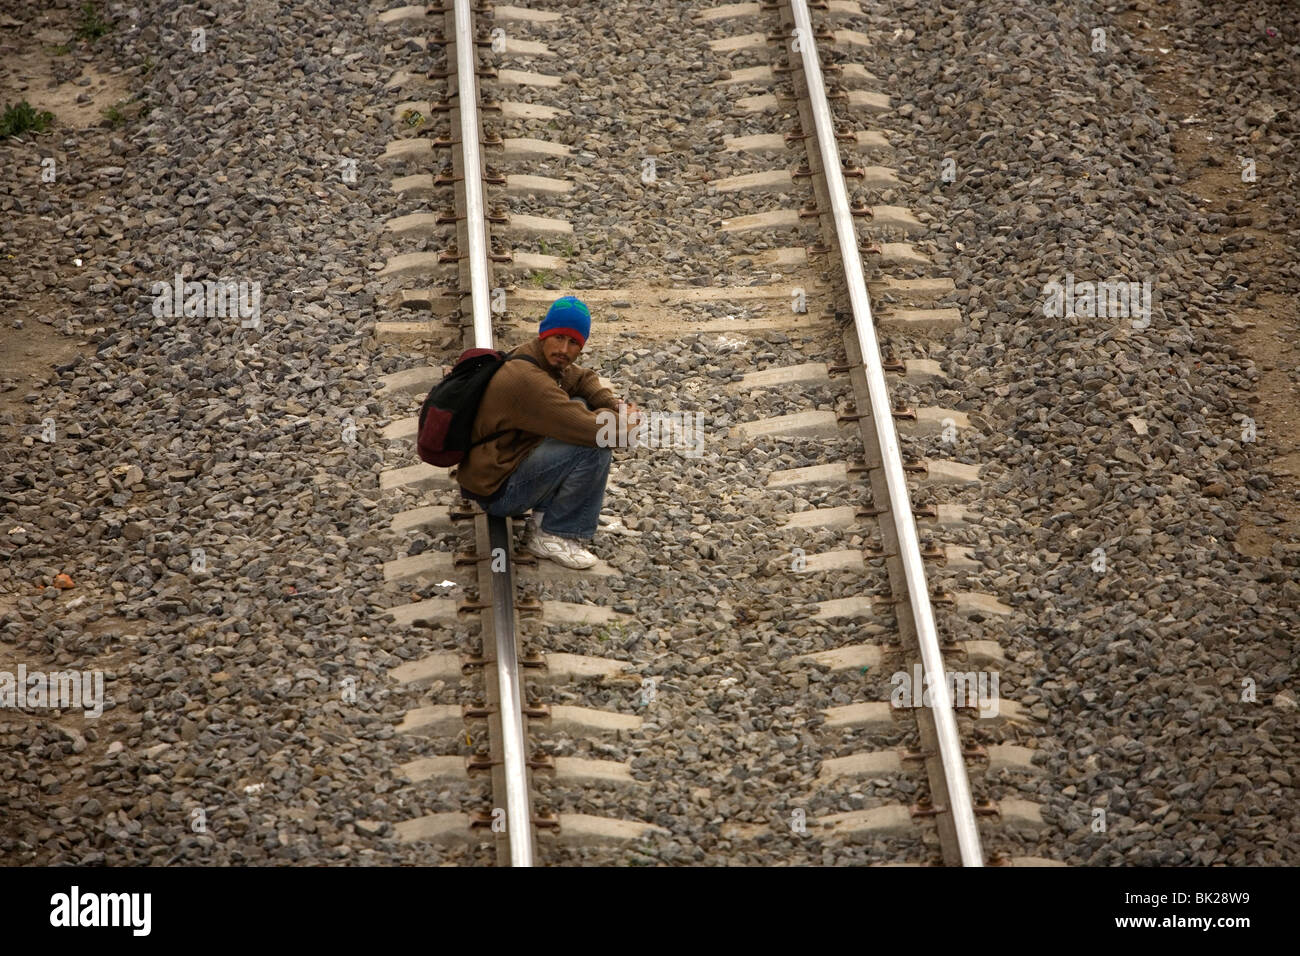 An undocumented migrant traveling across Mexico to work in the United States waits to jump a train in Mexico City, Mexico Stock Photo